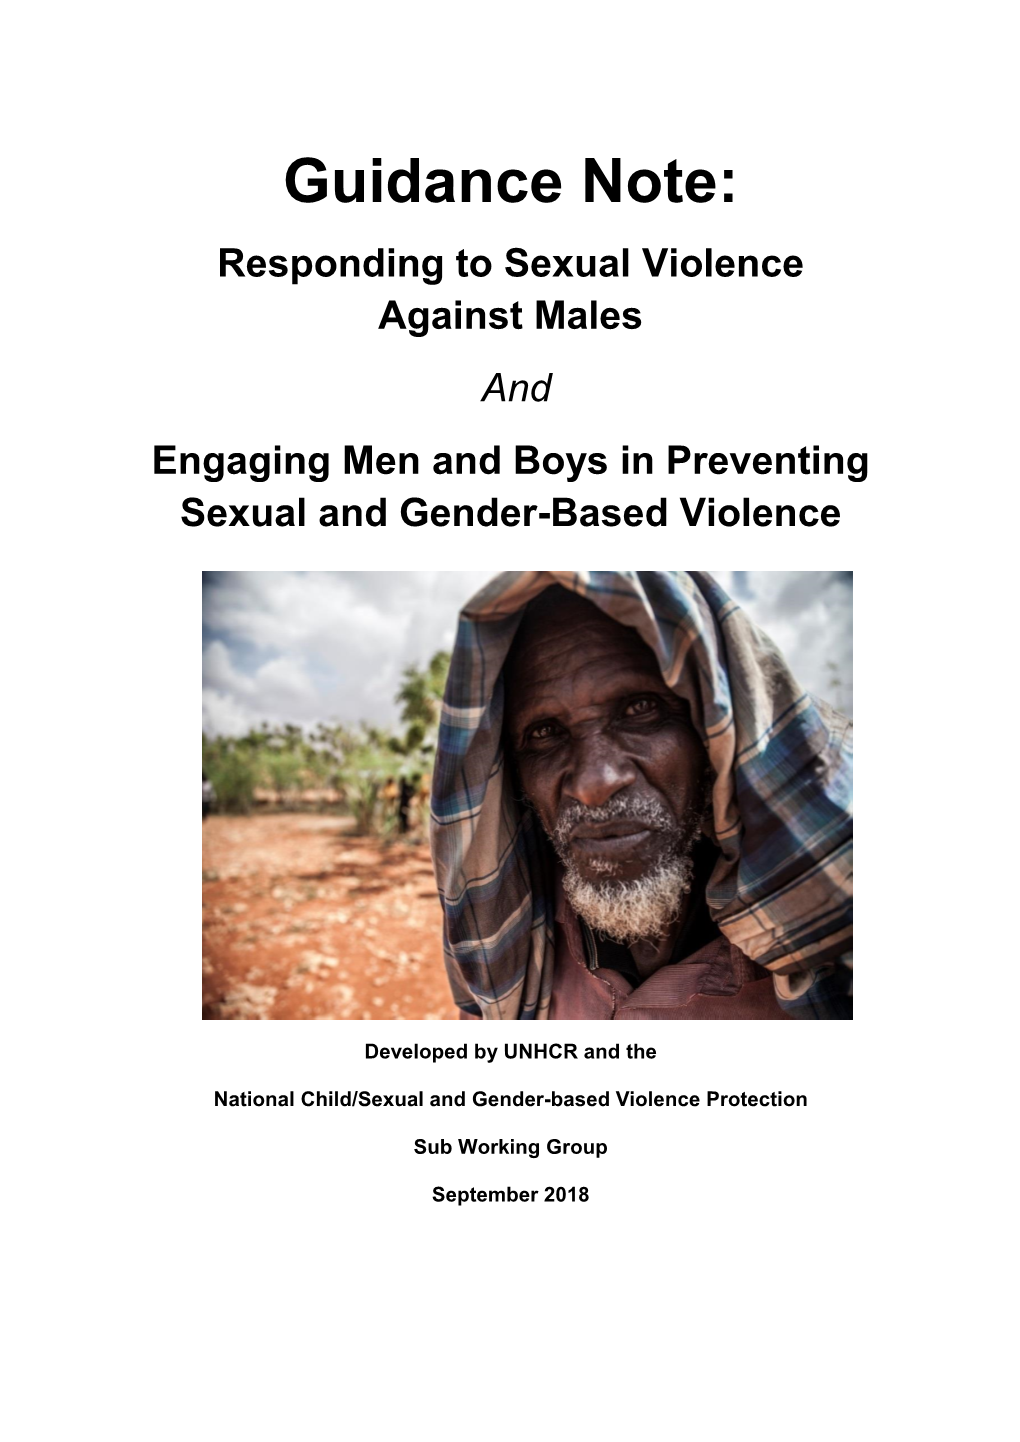 Guidance Note: Responding to Sexual Violence Against Males and Engaging Men and Boys in Preventing Sexual and Gender-Based Violence